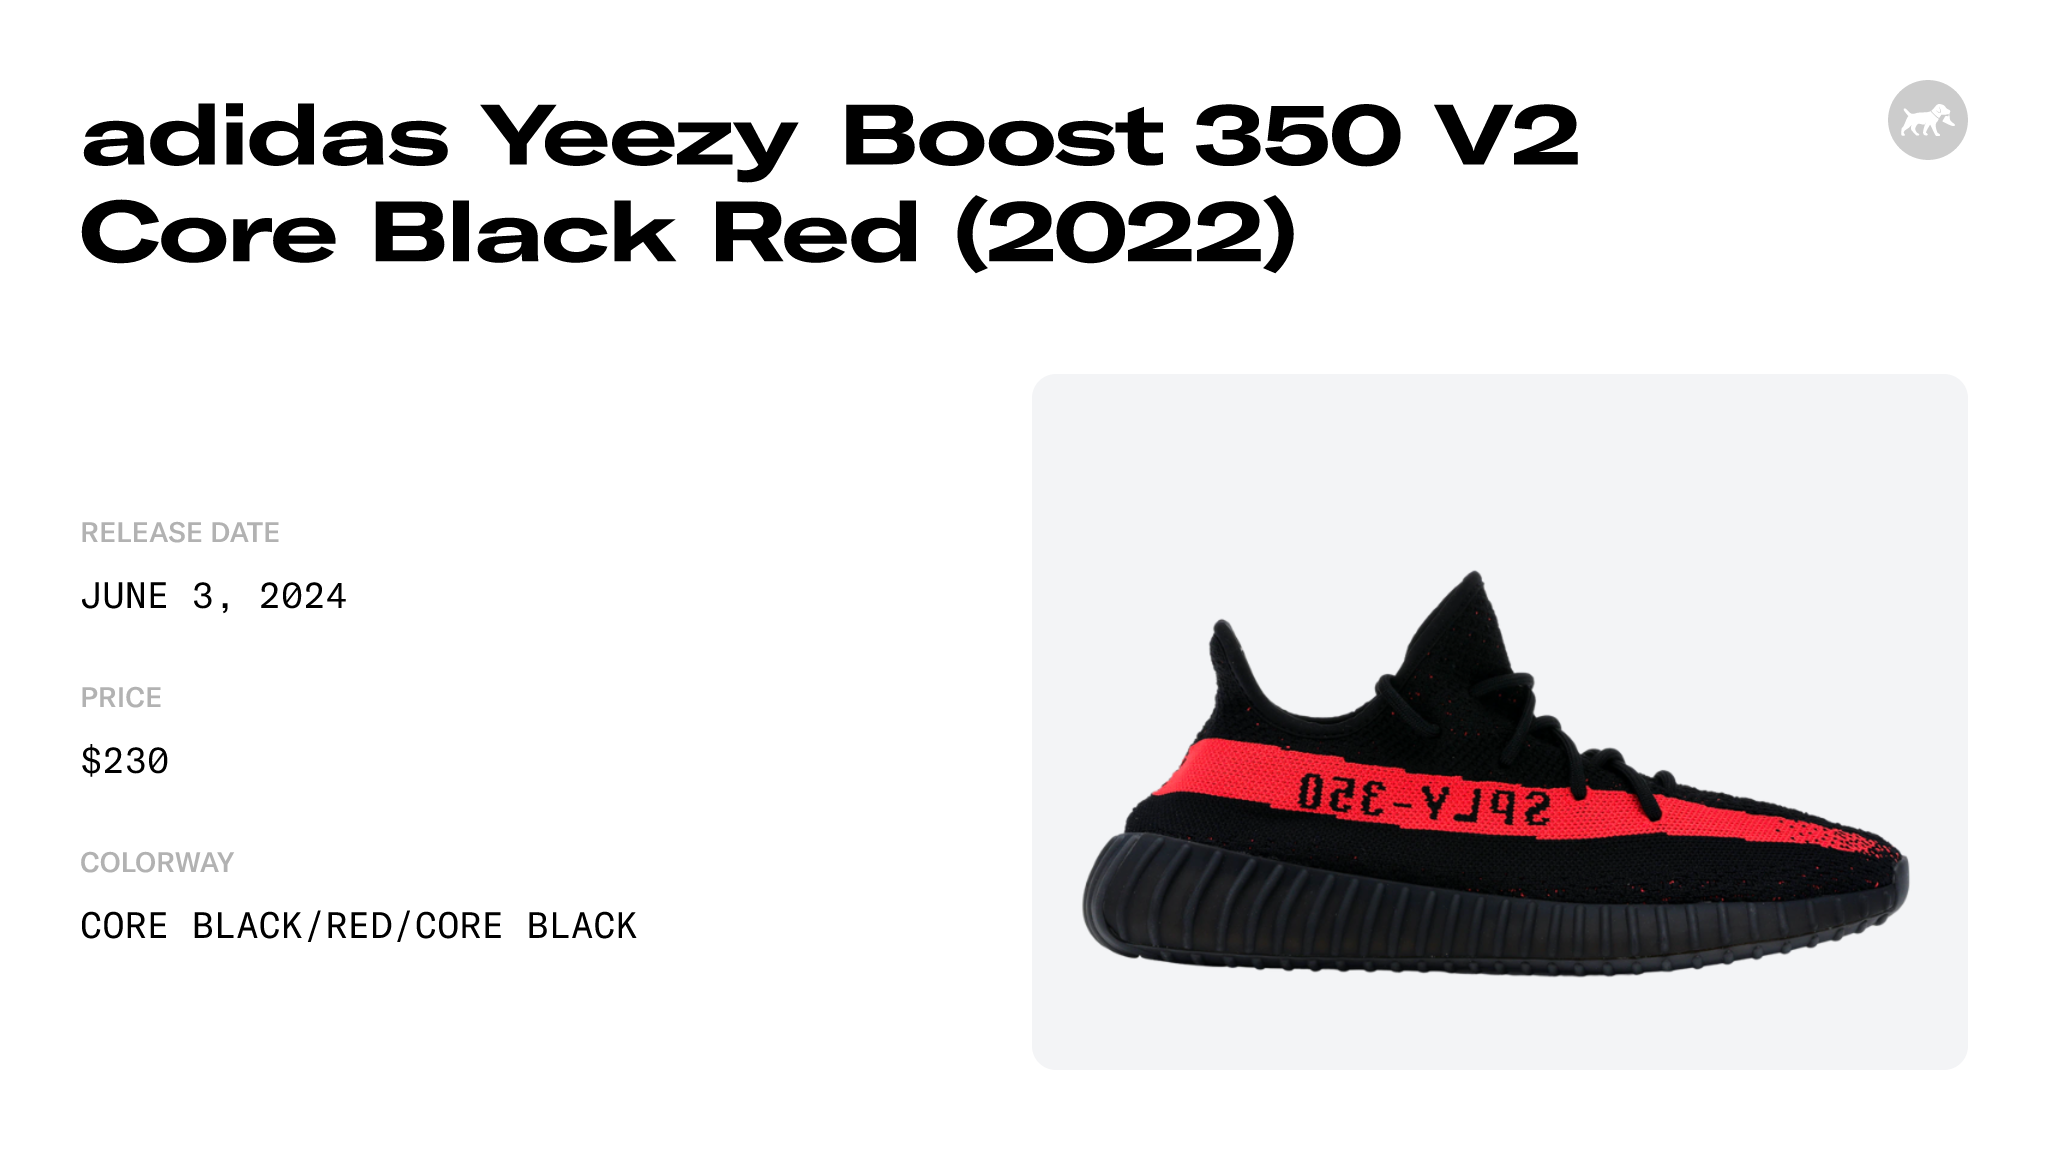 adidas Yeezy Boost 350 V2 Core Black Red (2022) - BY9612 Raffles